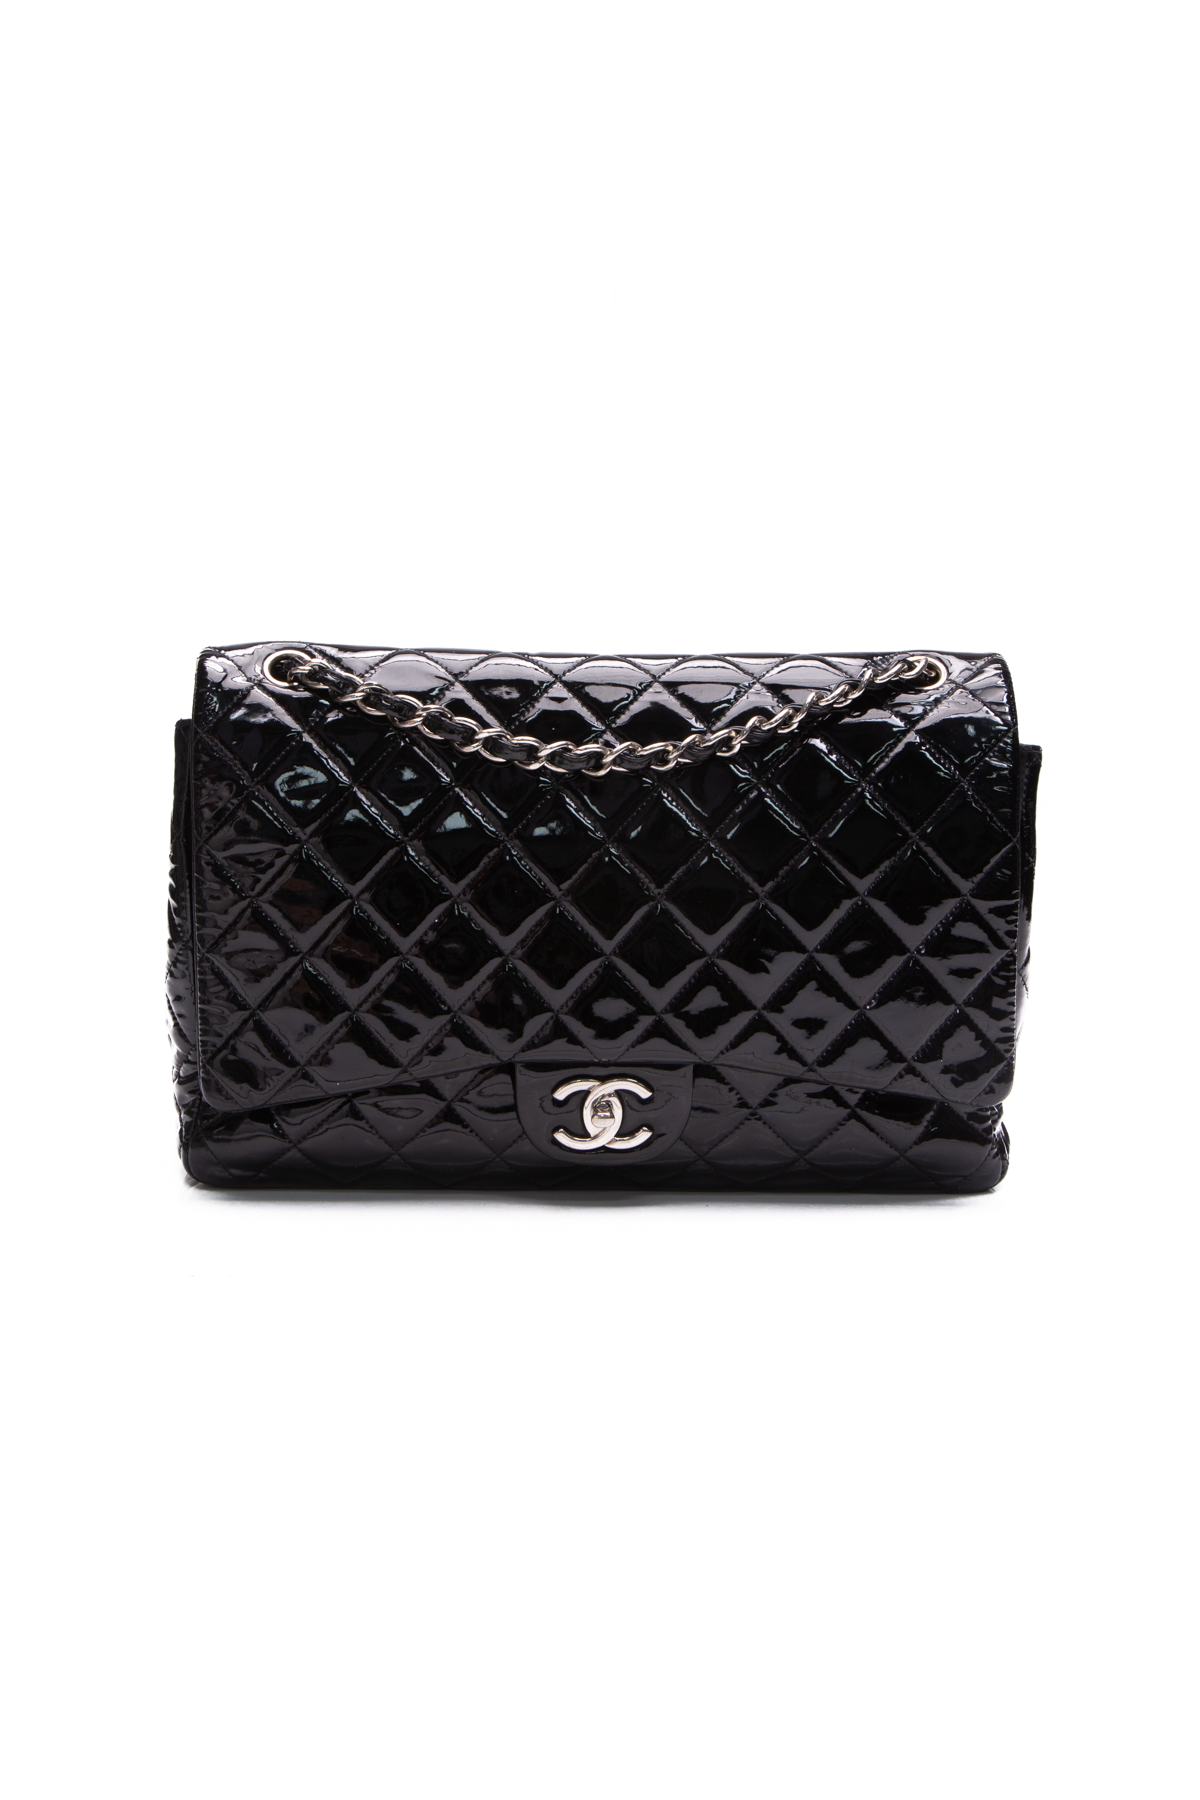 Chanel Maxi Double Flap Bag - Couture USA